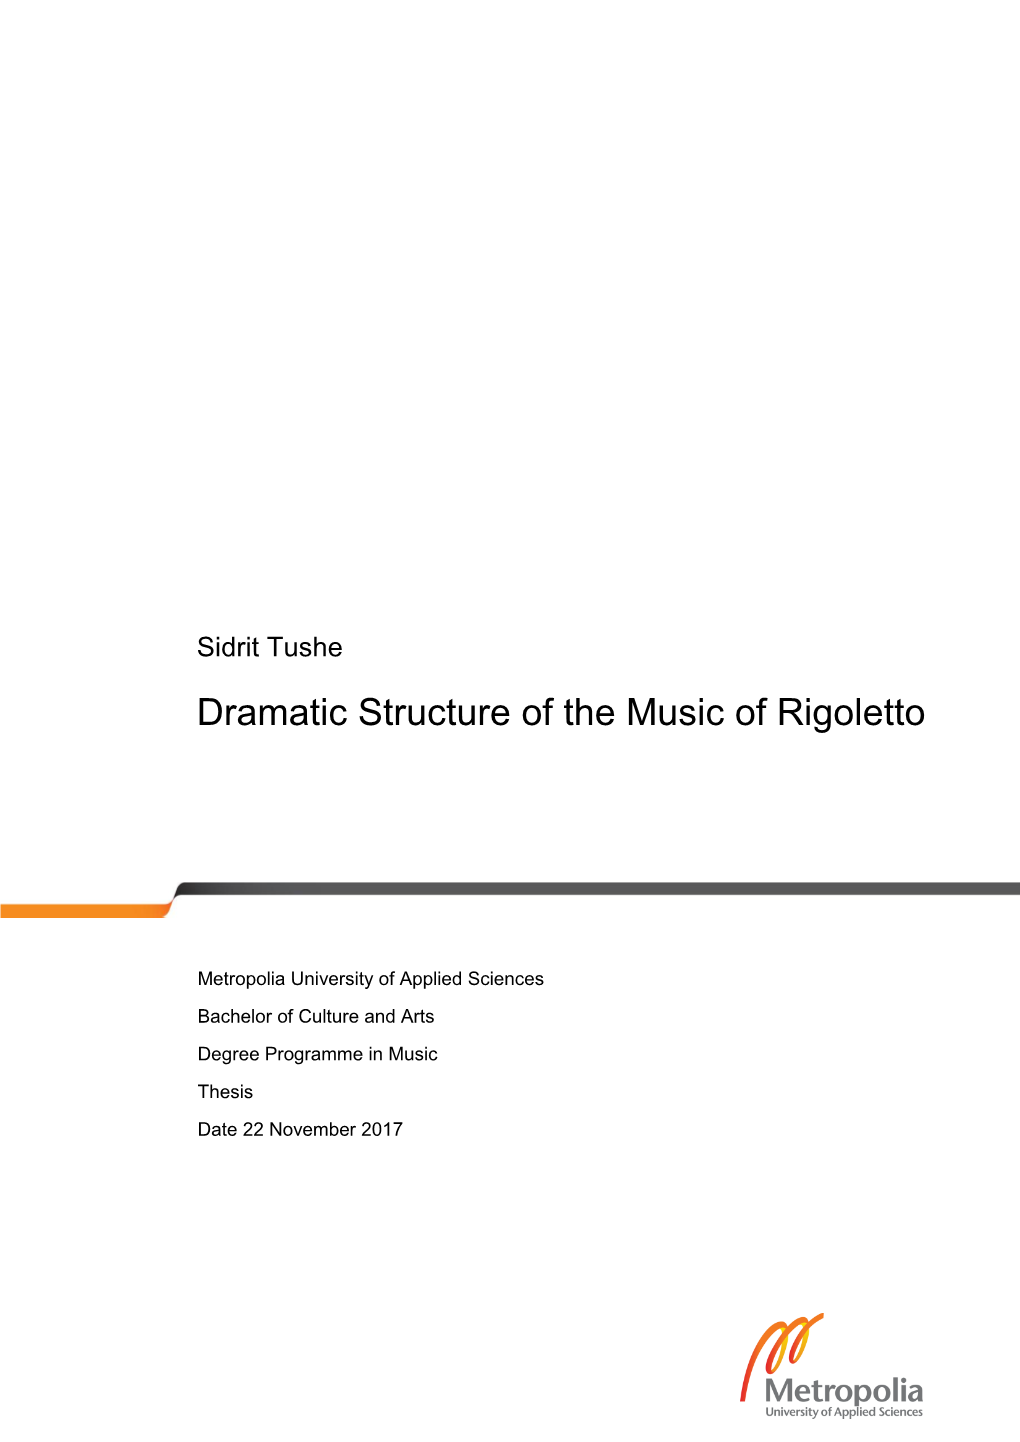 Dramatic Structure of the Music of Rigoletto